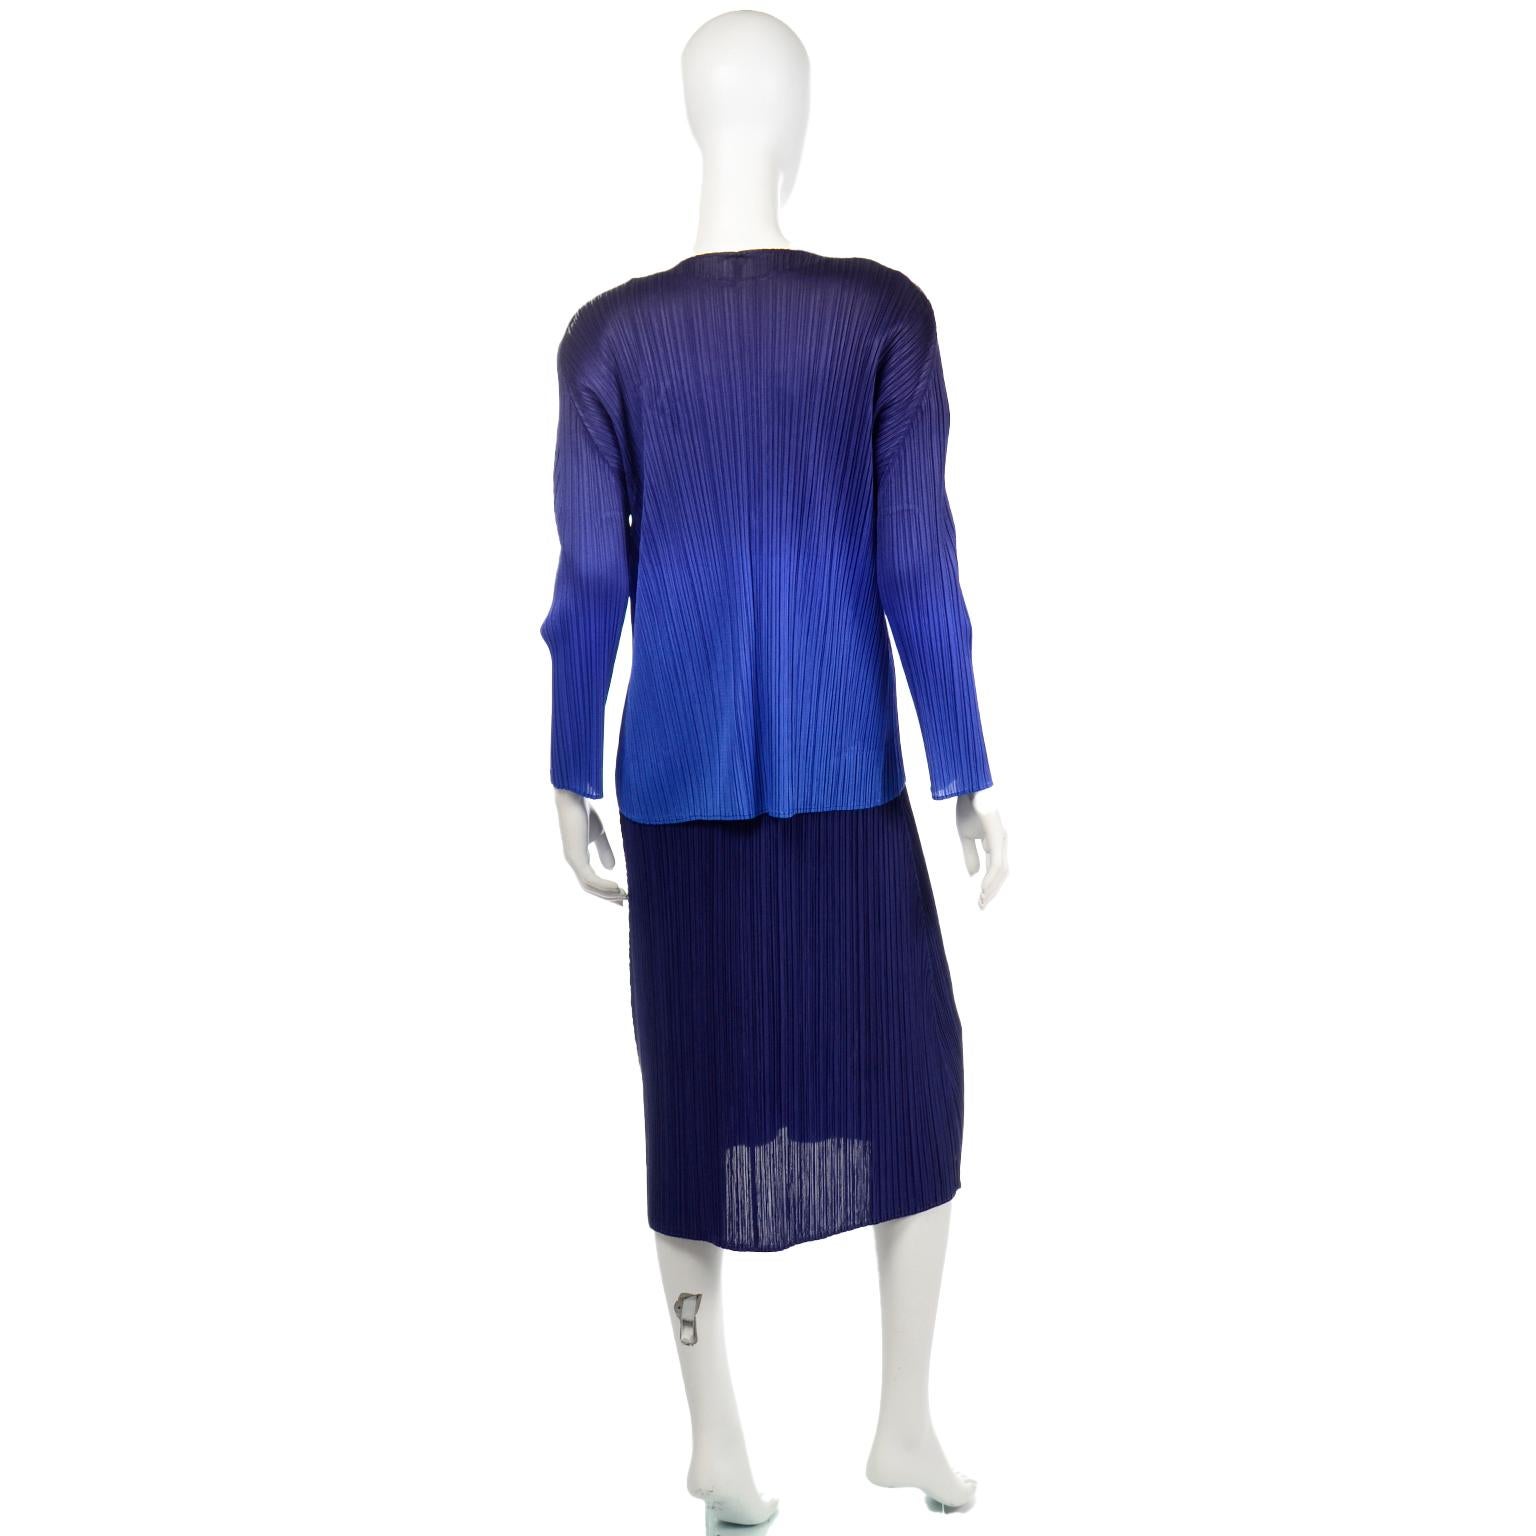 Women's Issey Miyake Pleats Please Blue Dress & Ombre Jacket Outfit